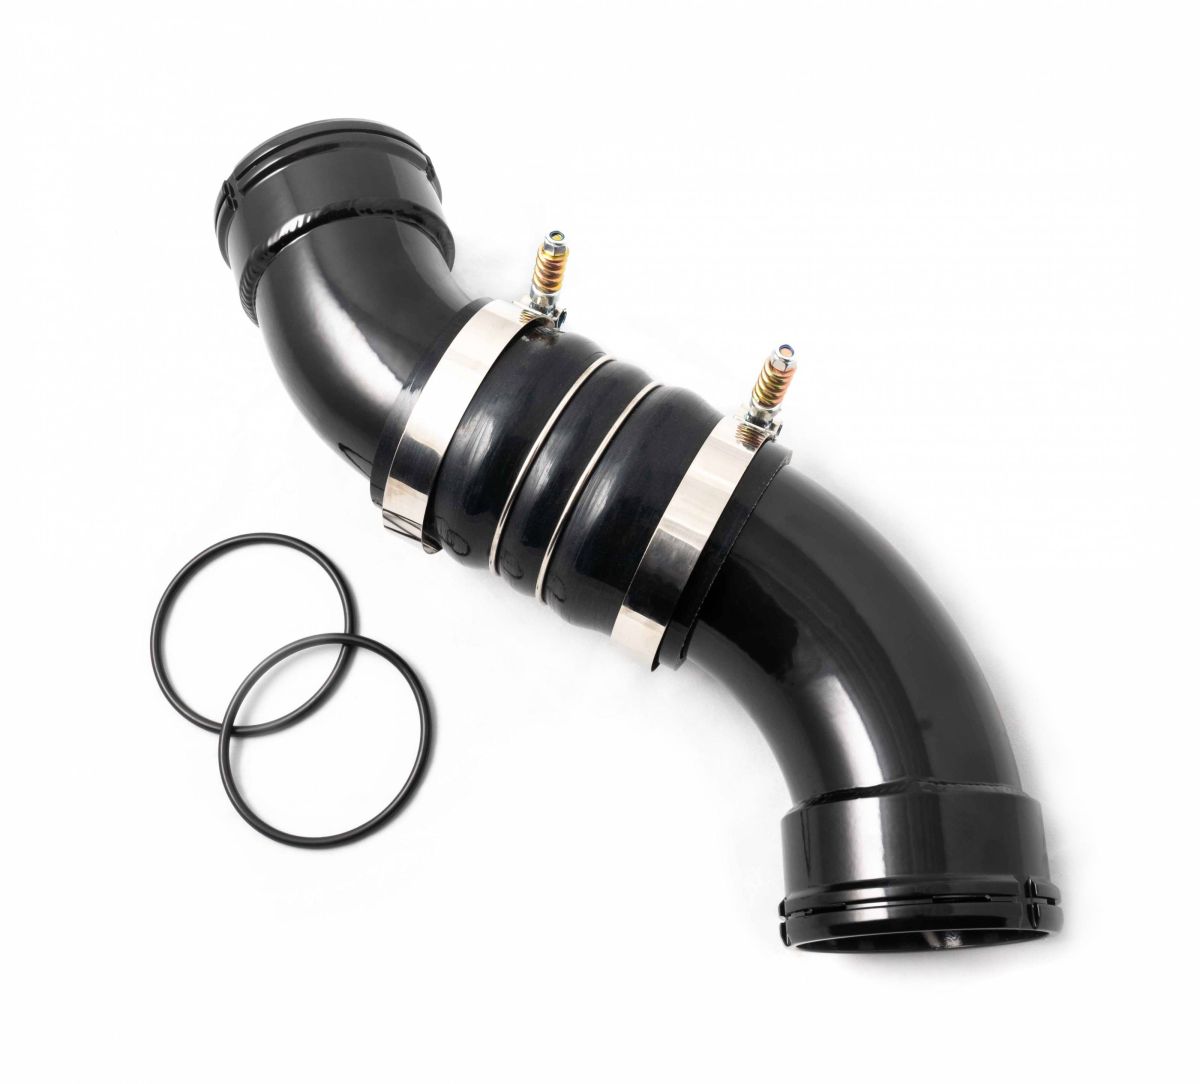 Rudy's Performance Parts - Rudy's Black Cold Side Intercooler Pipe Kit For 2006-2010 GMC Chevy LBZ LMM 6.6L